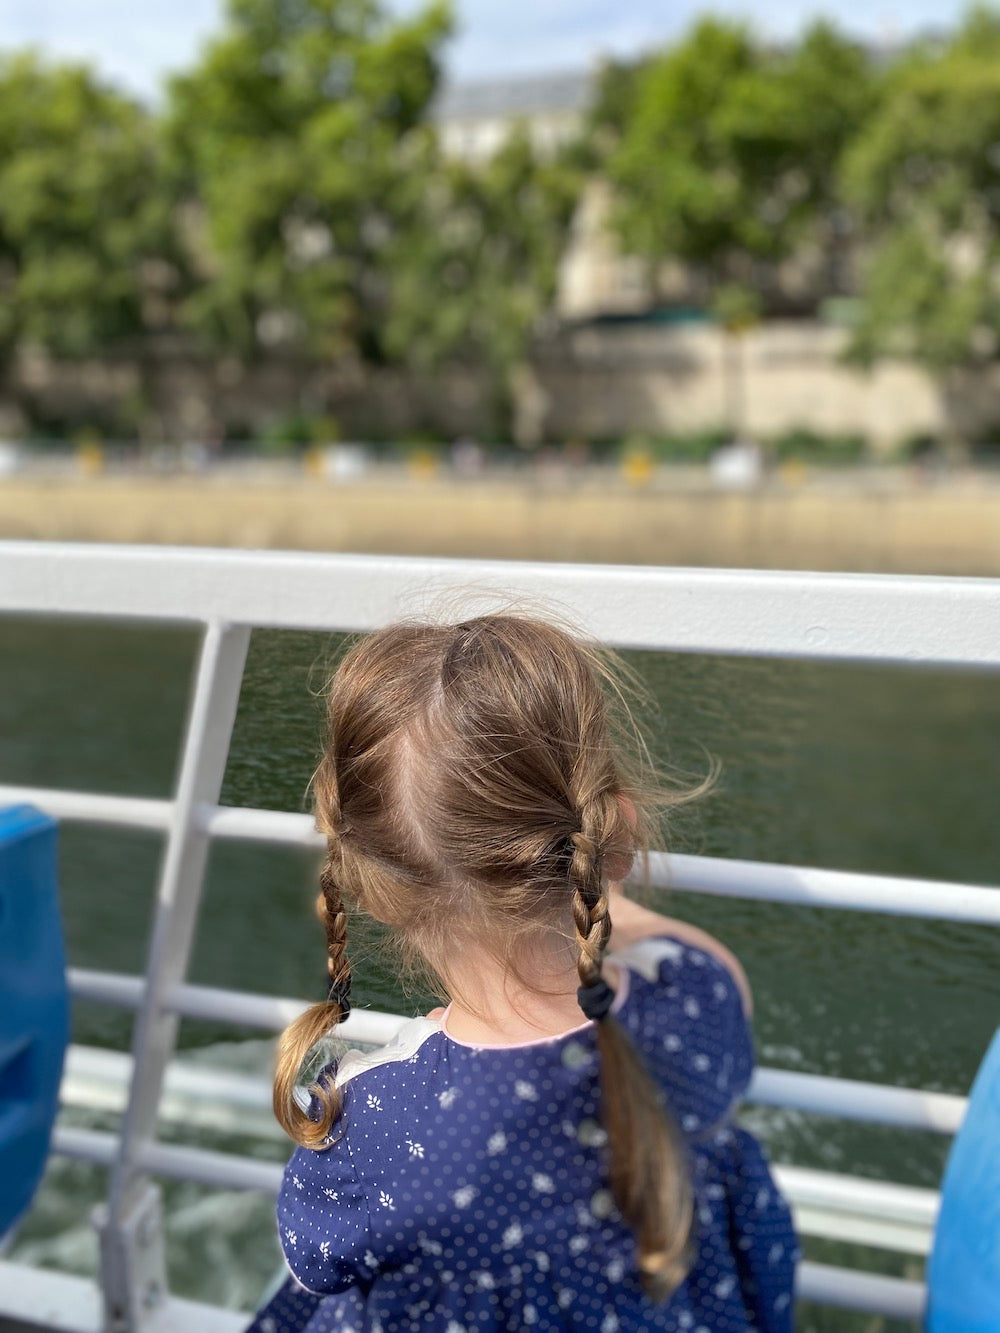 Holidays in Paris as a family - Travelling with kids - Children boutique